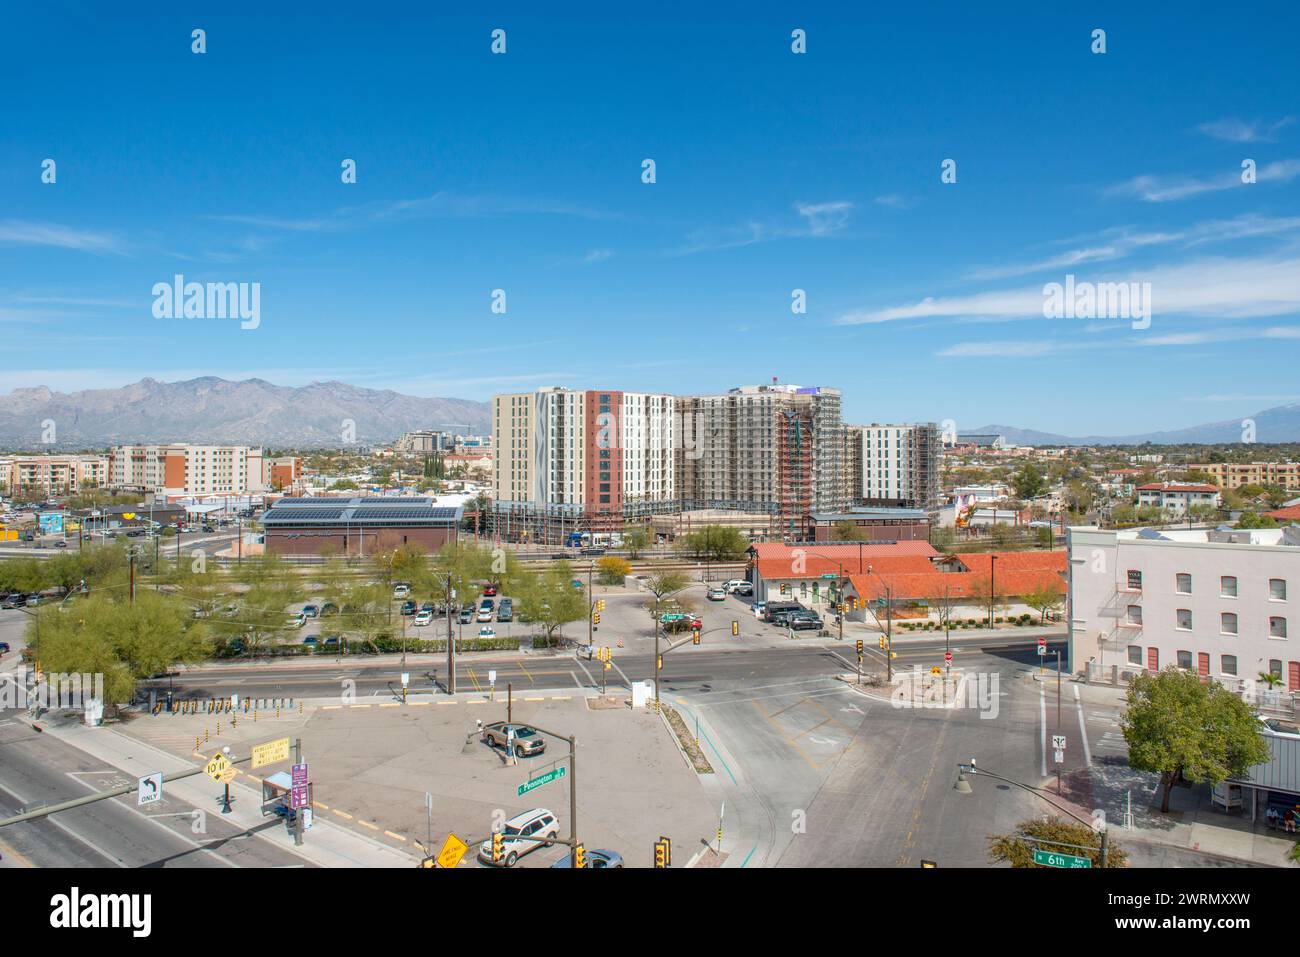 Aerial view of new construction behind the railway station in the 6th and Toole area of Tucson AZ Stock Photo